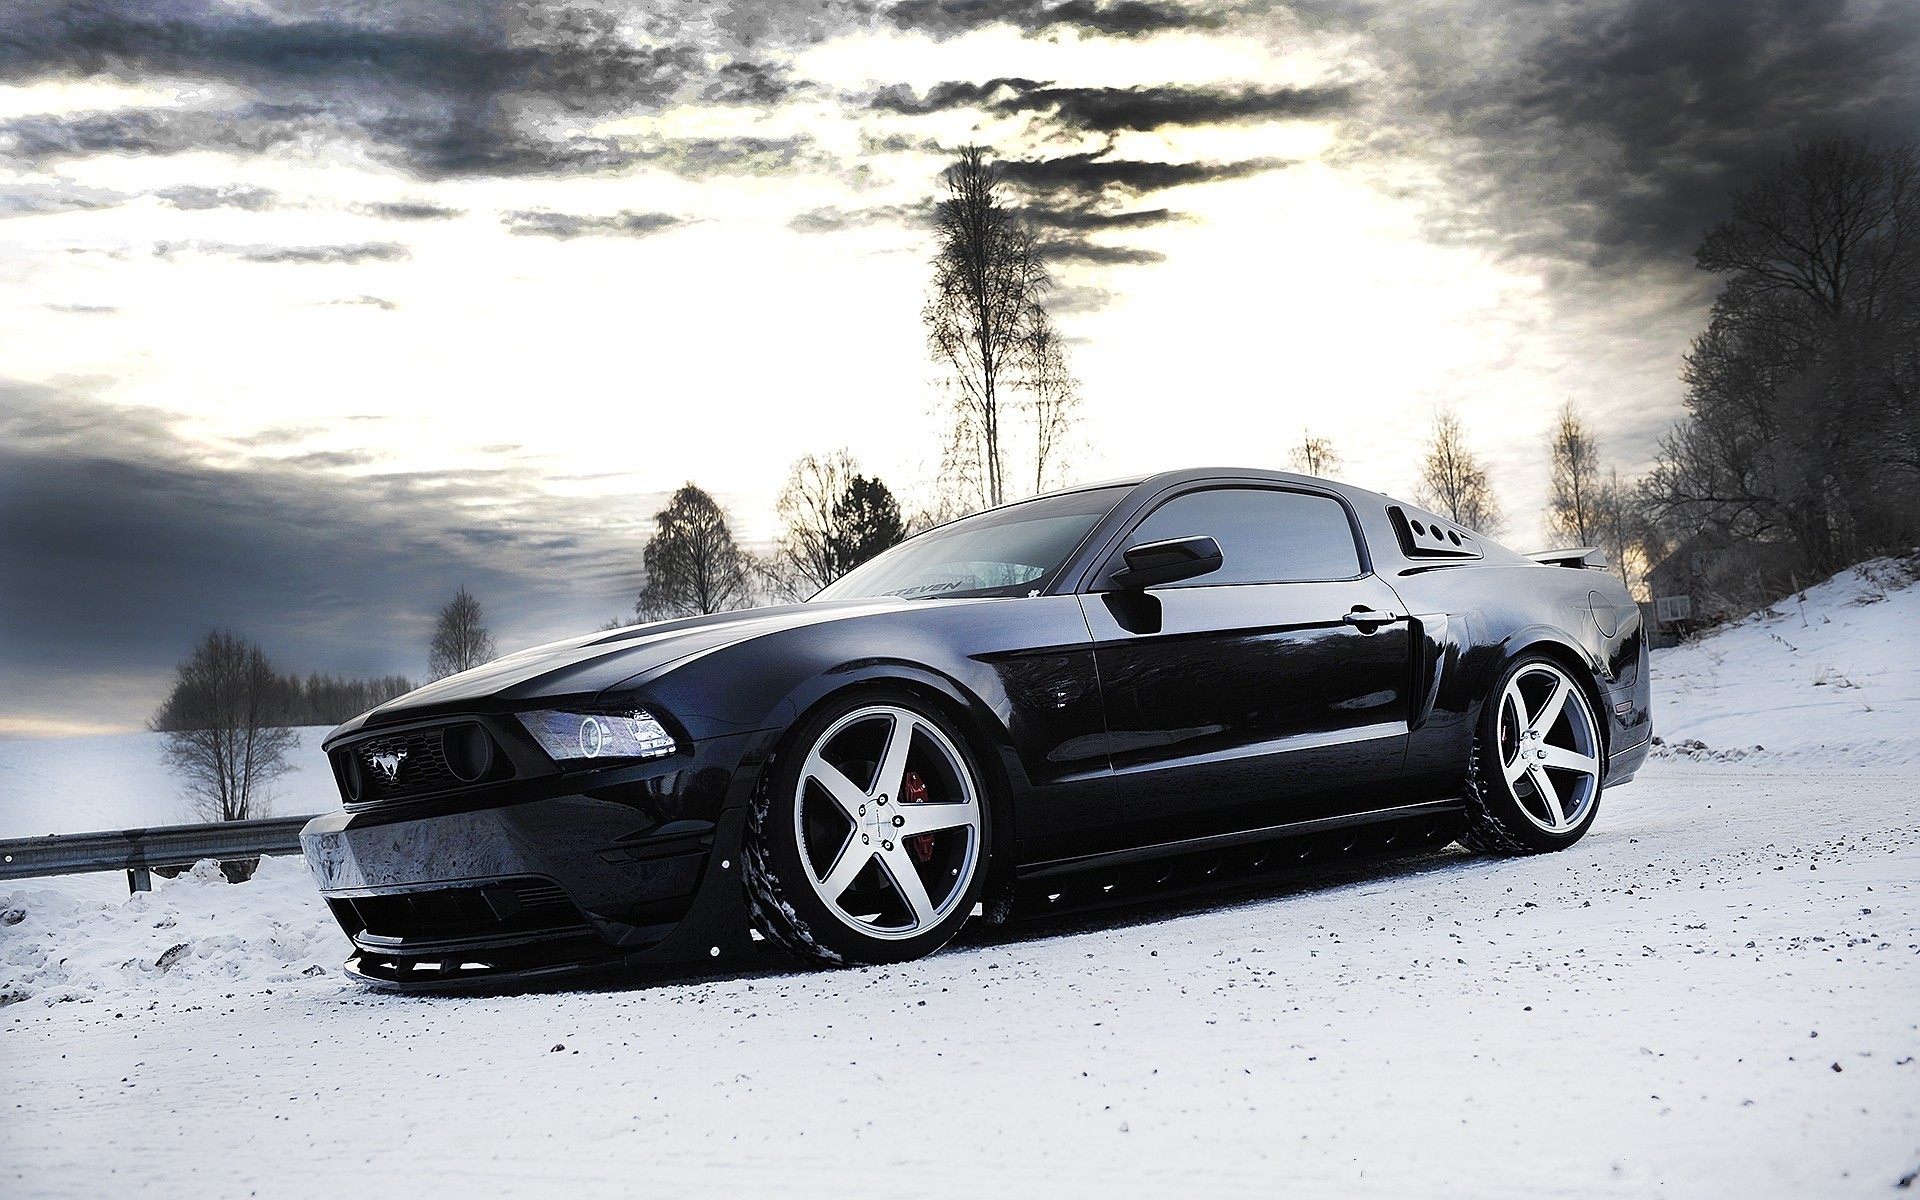 Ford Mustang, Tuning, Car, Snow, Winter Wallpapers HD